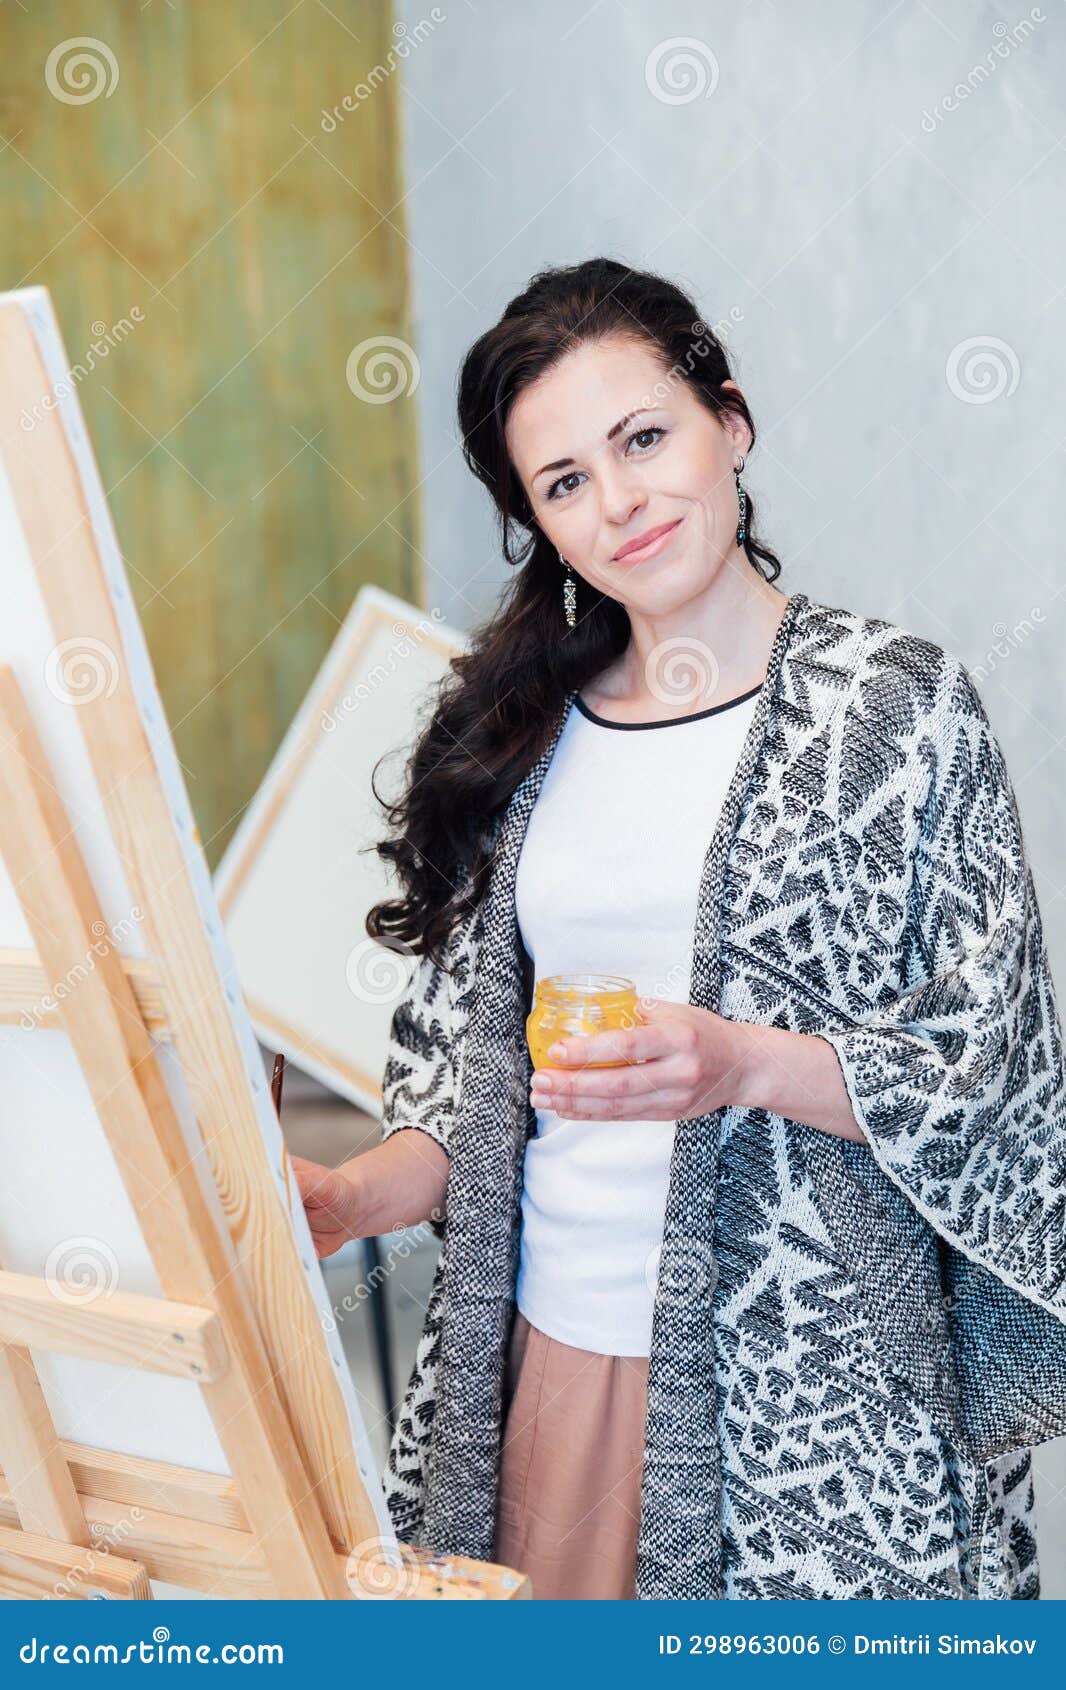 Female Artist Works on Abstract Oil Painting, Moving Paint Brush ...